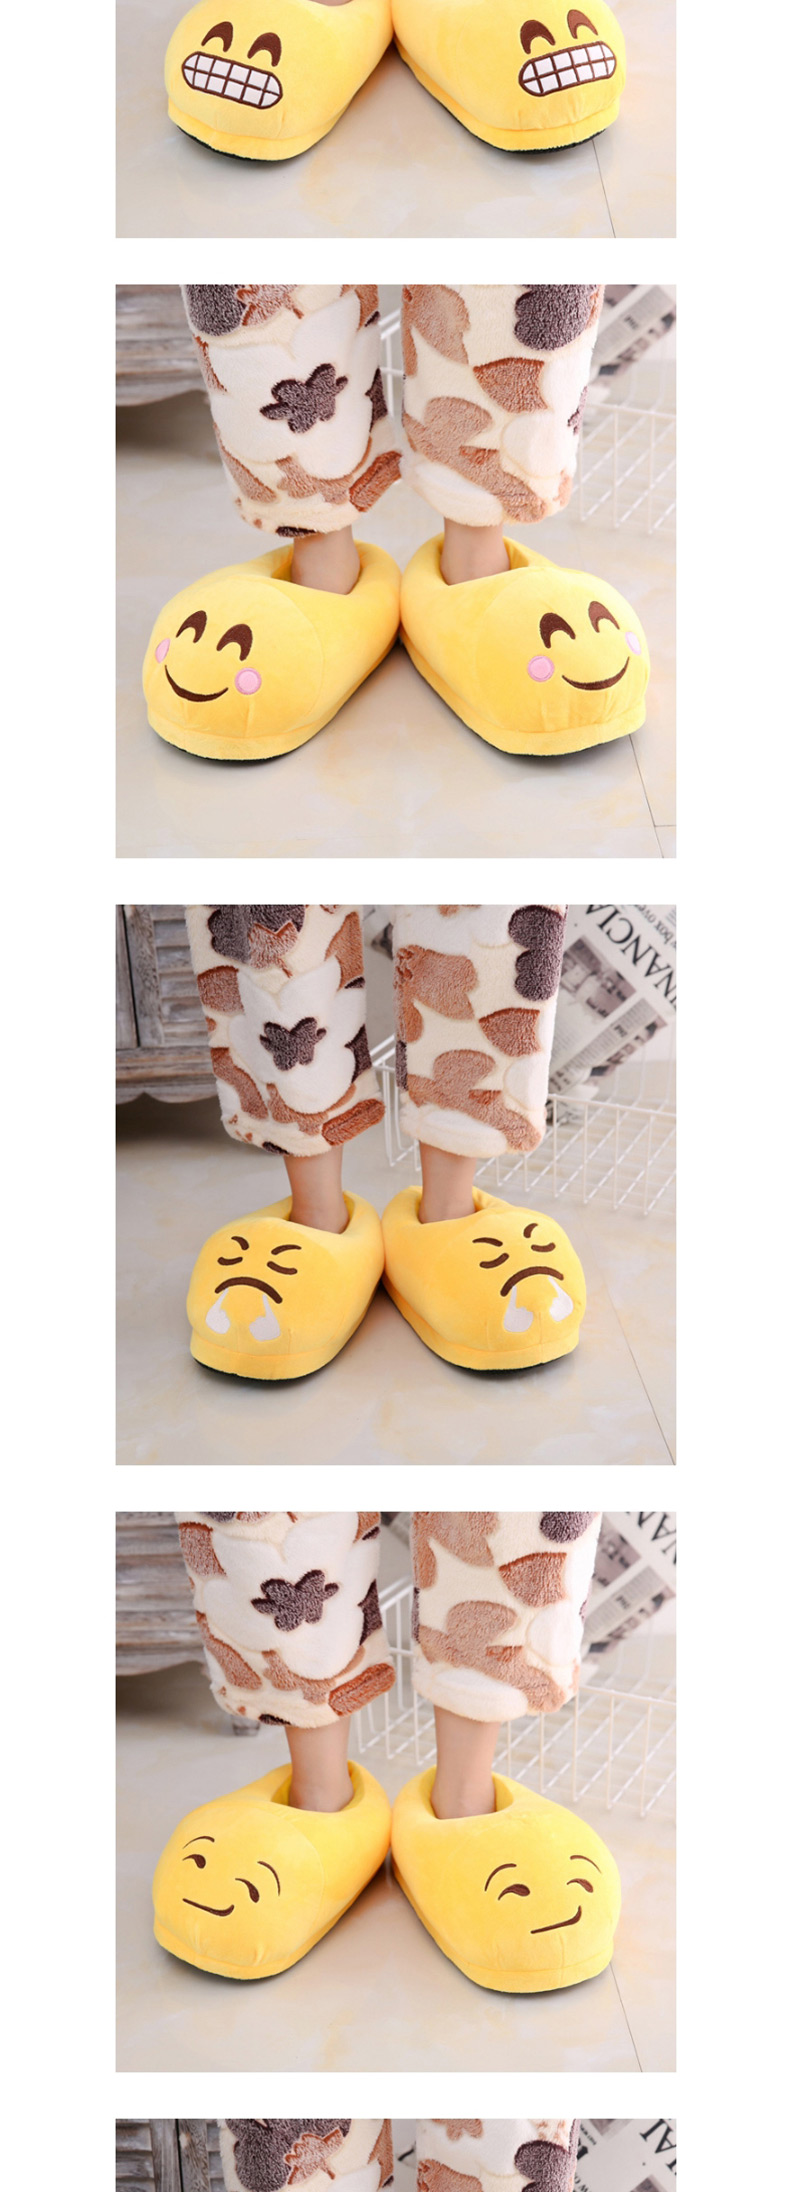 Fashion 18 Yellow Blush Cartoon Expression Plush Bag With Cotton Slippers,Slippers